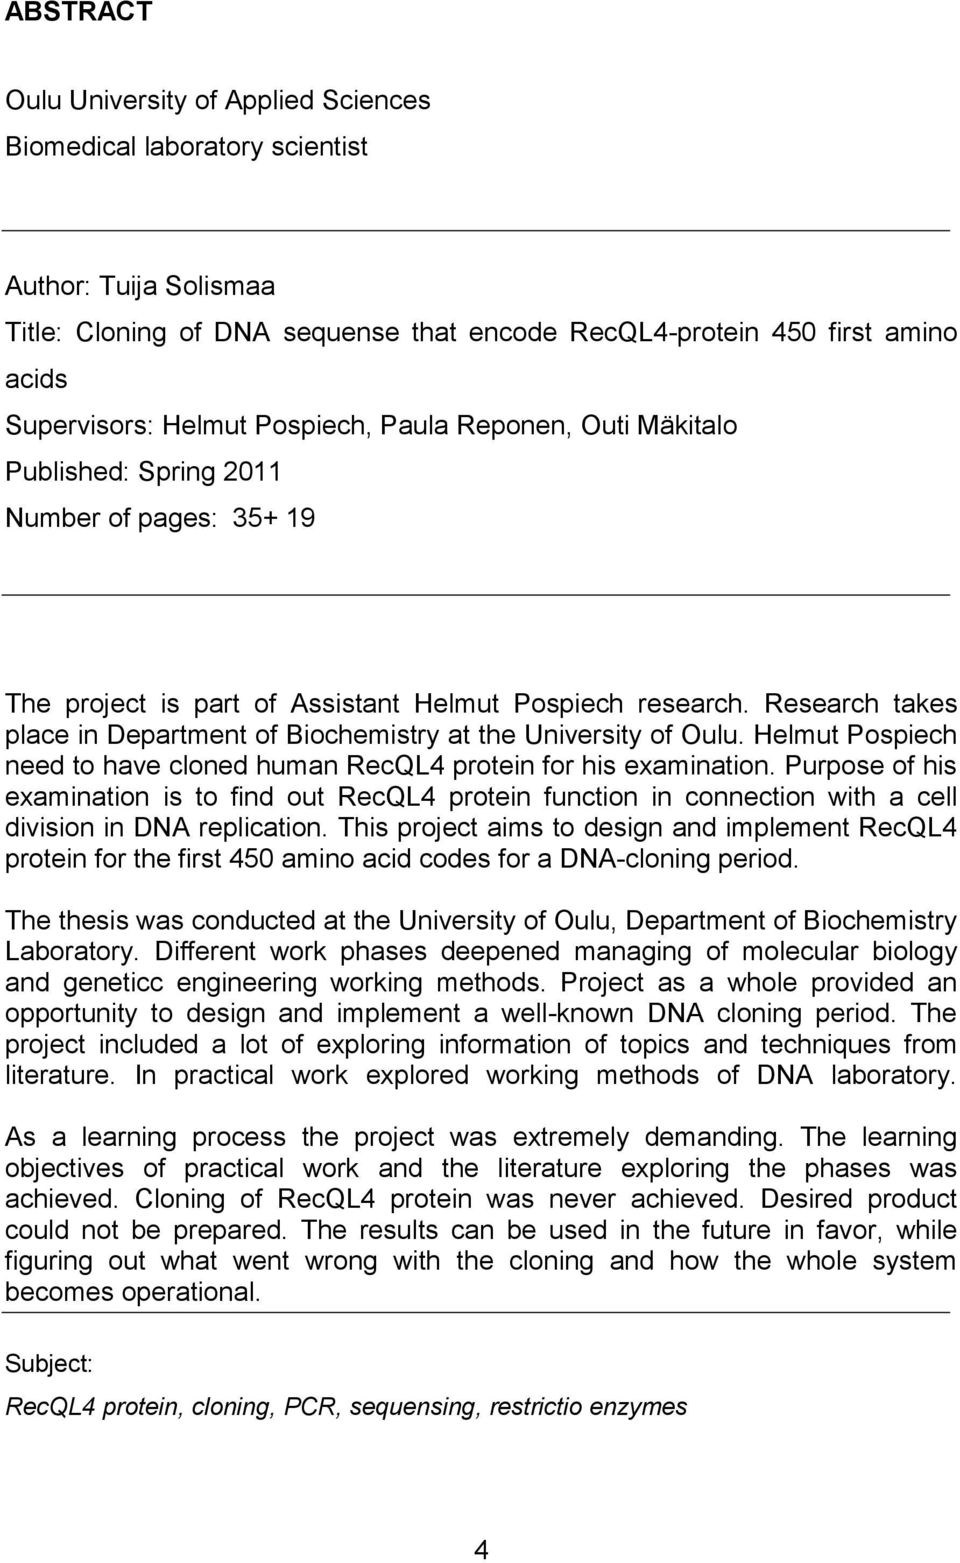 Research takes place in Department of Biochemistry at the University of Oulu. Helmut Pospiech need to have cloned human RecQL4 protein for his examination.